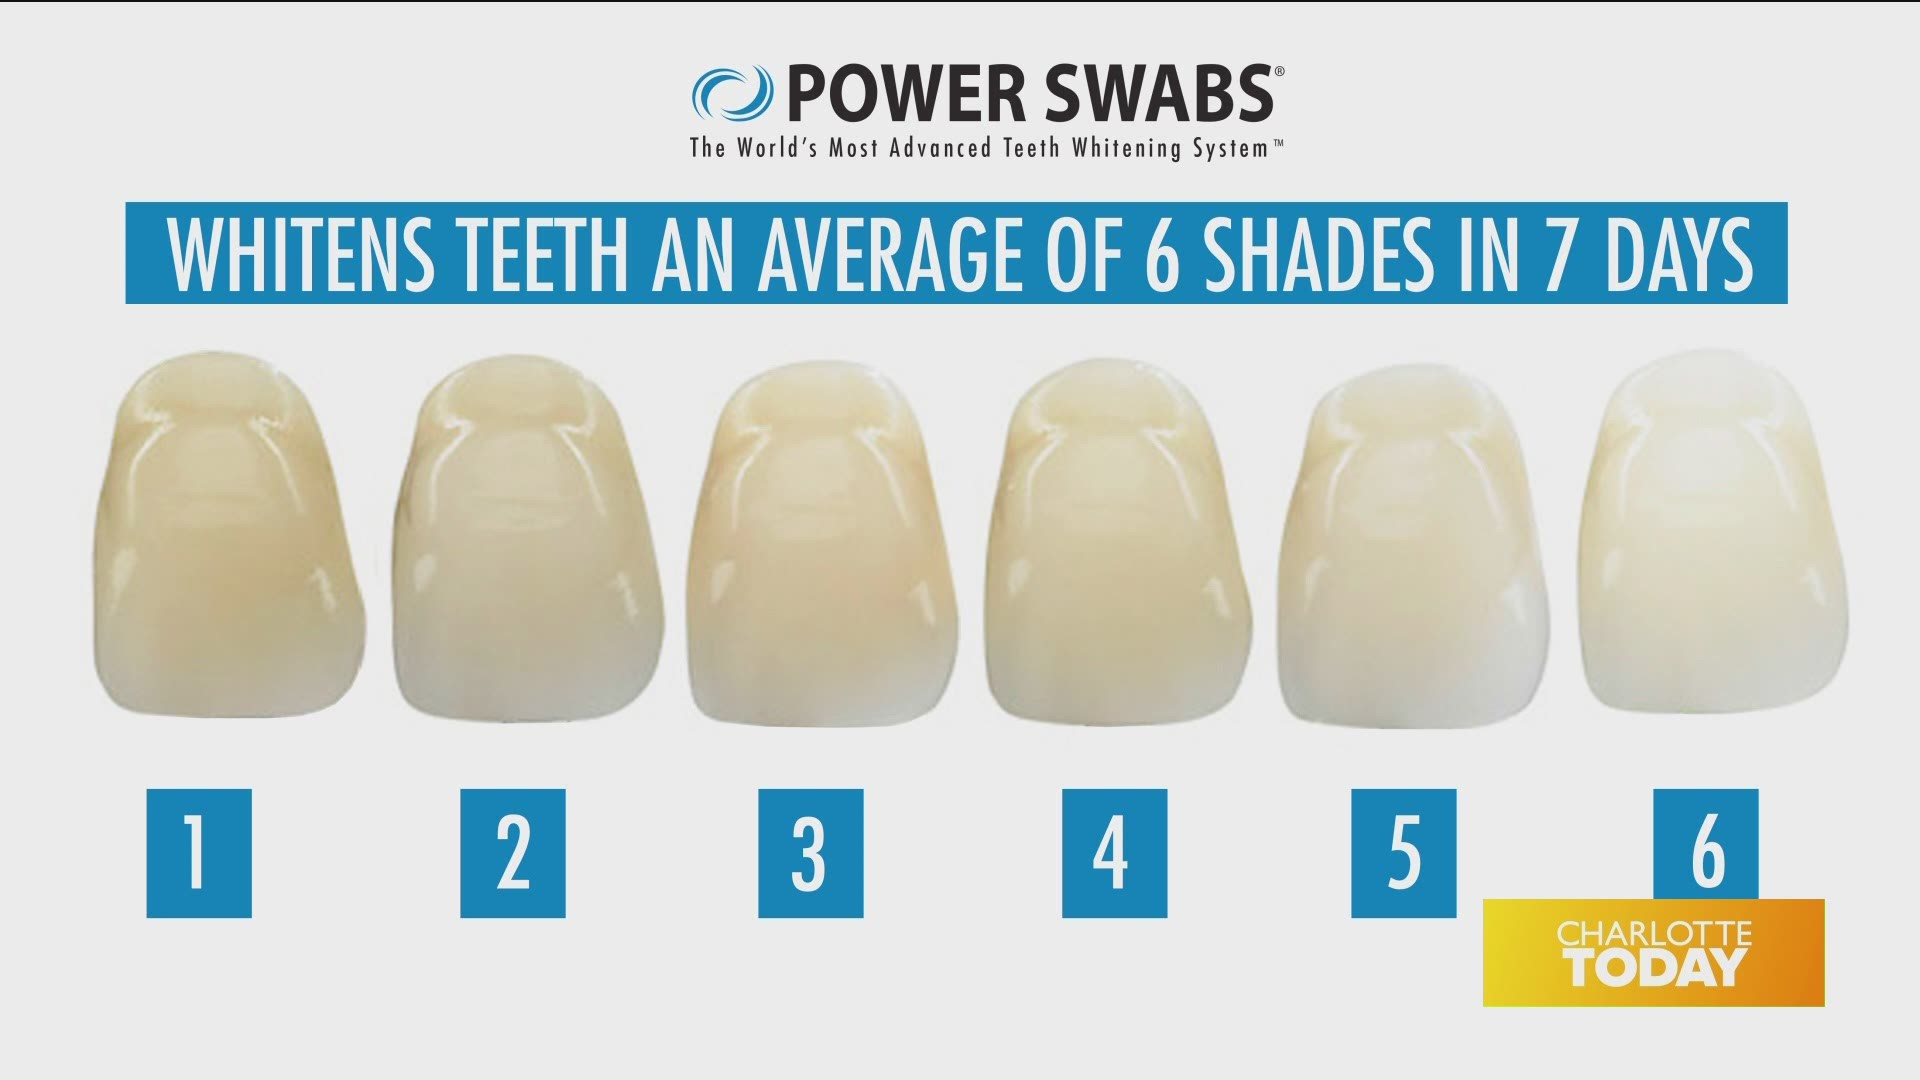 You can see your teeth get 2 shades whiter in 5 minutes